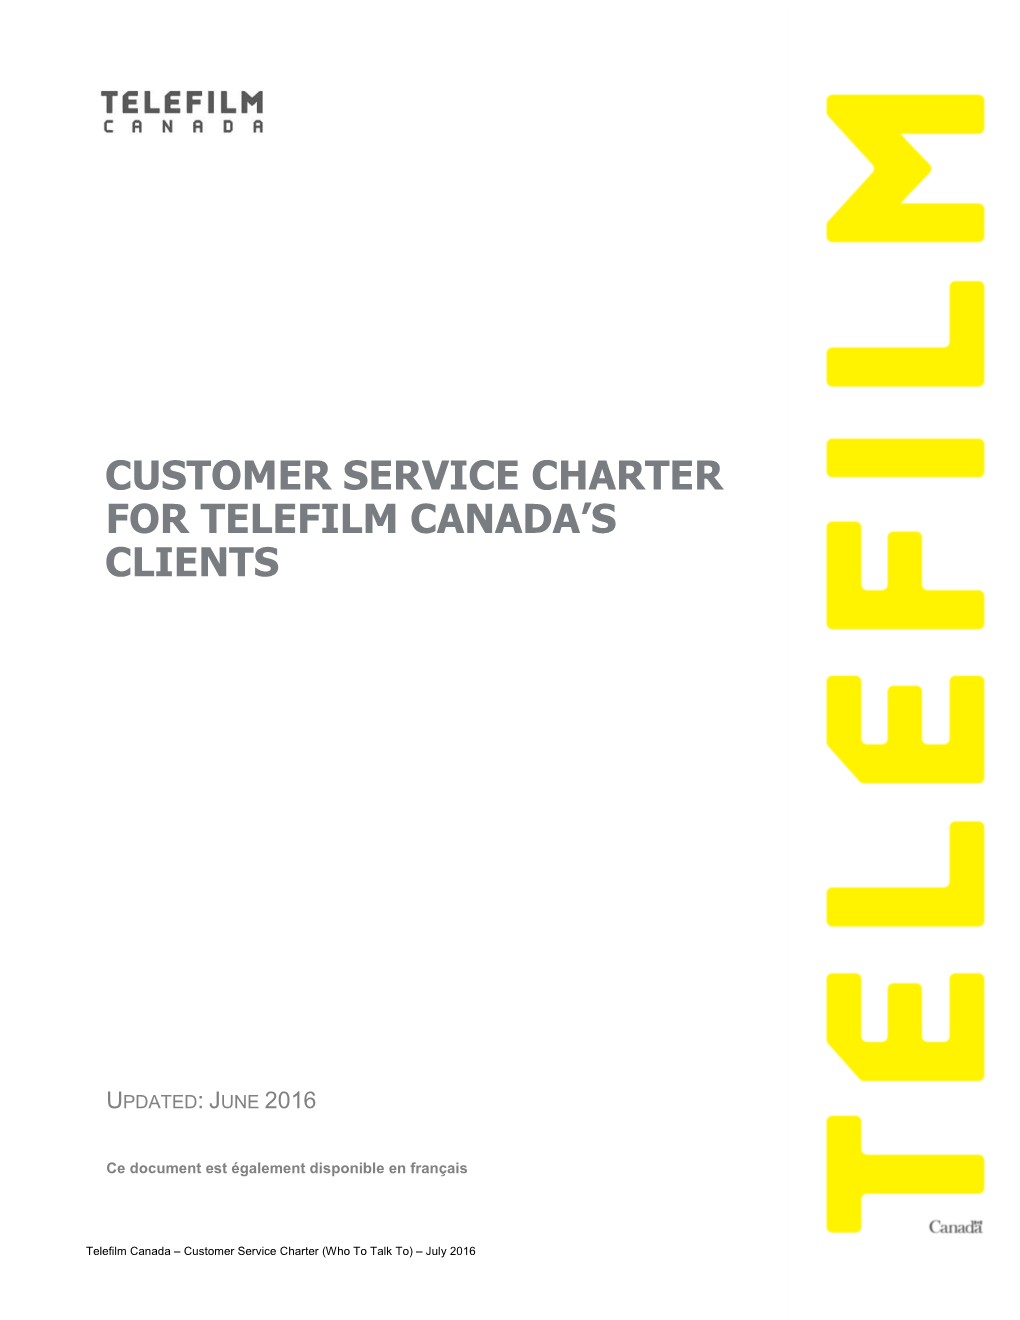 Customer Service Charter for Telefilm Canada's Clients